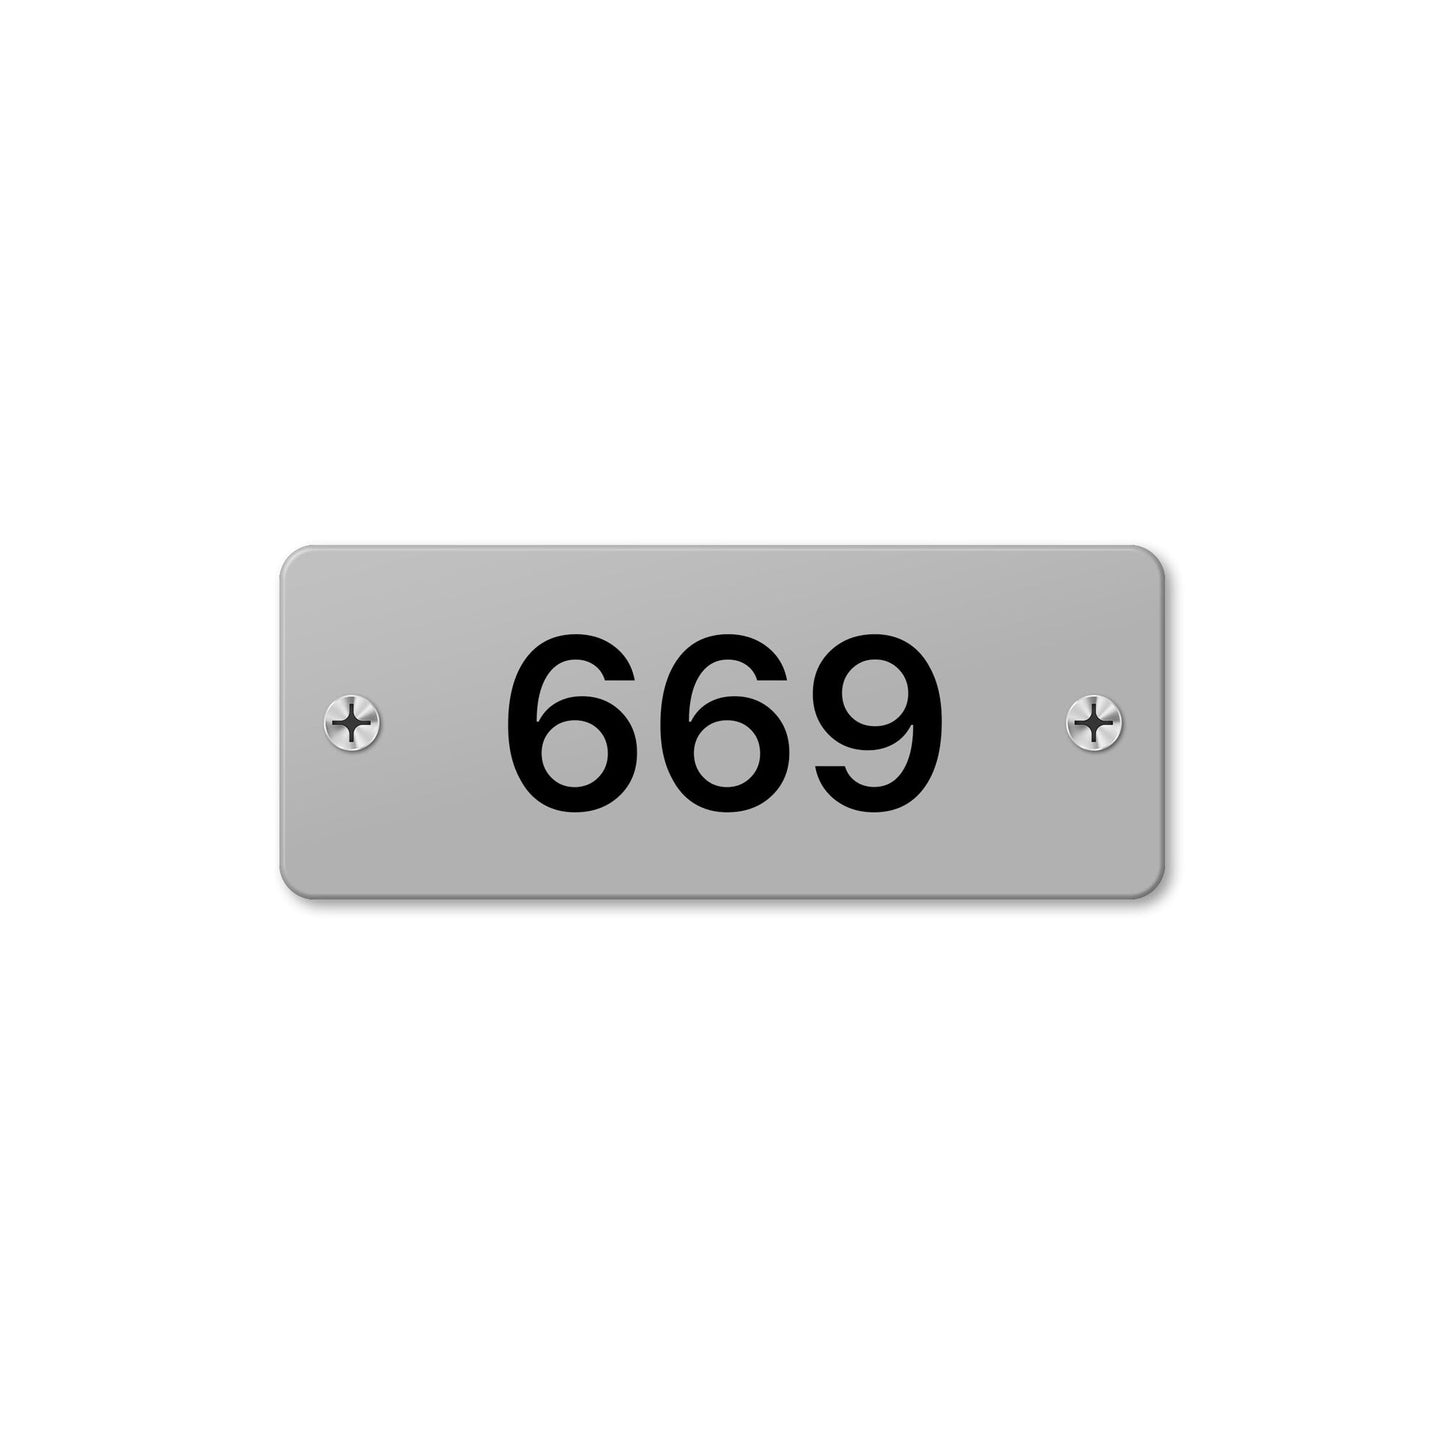 Numeral 669